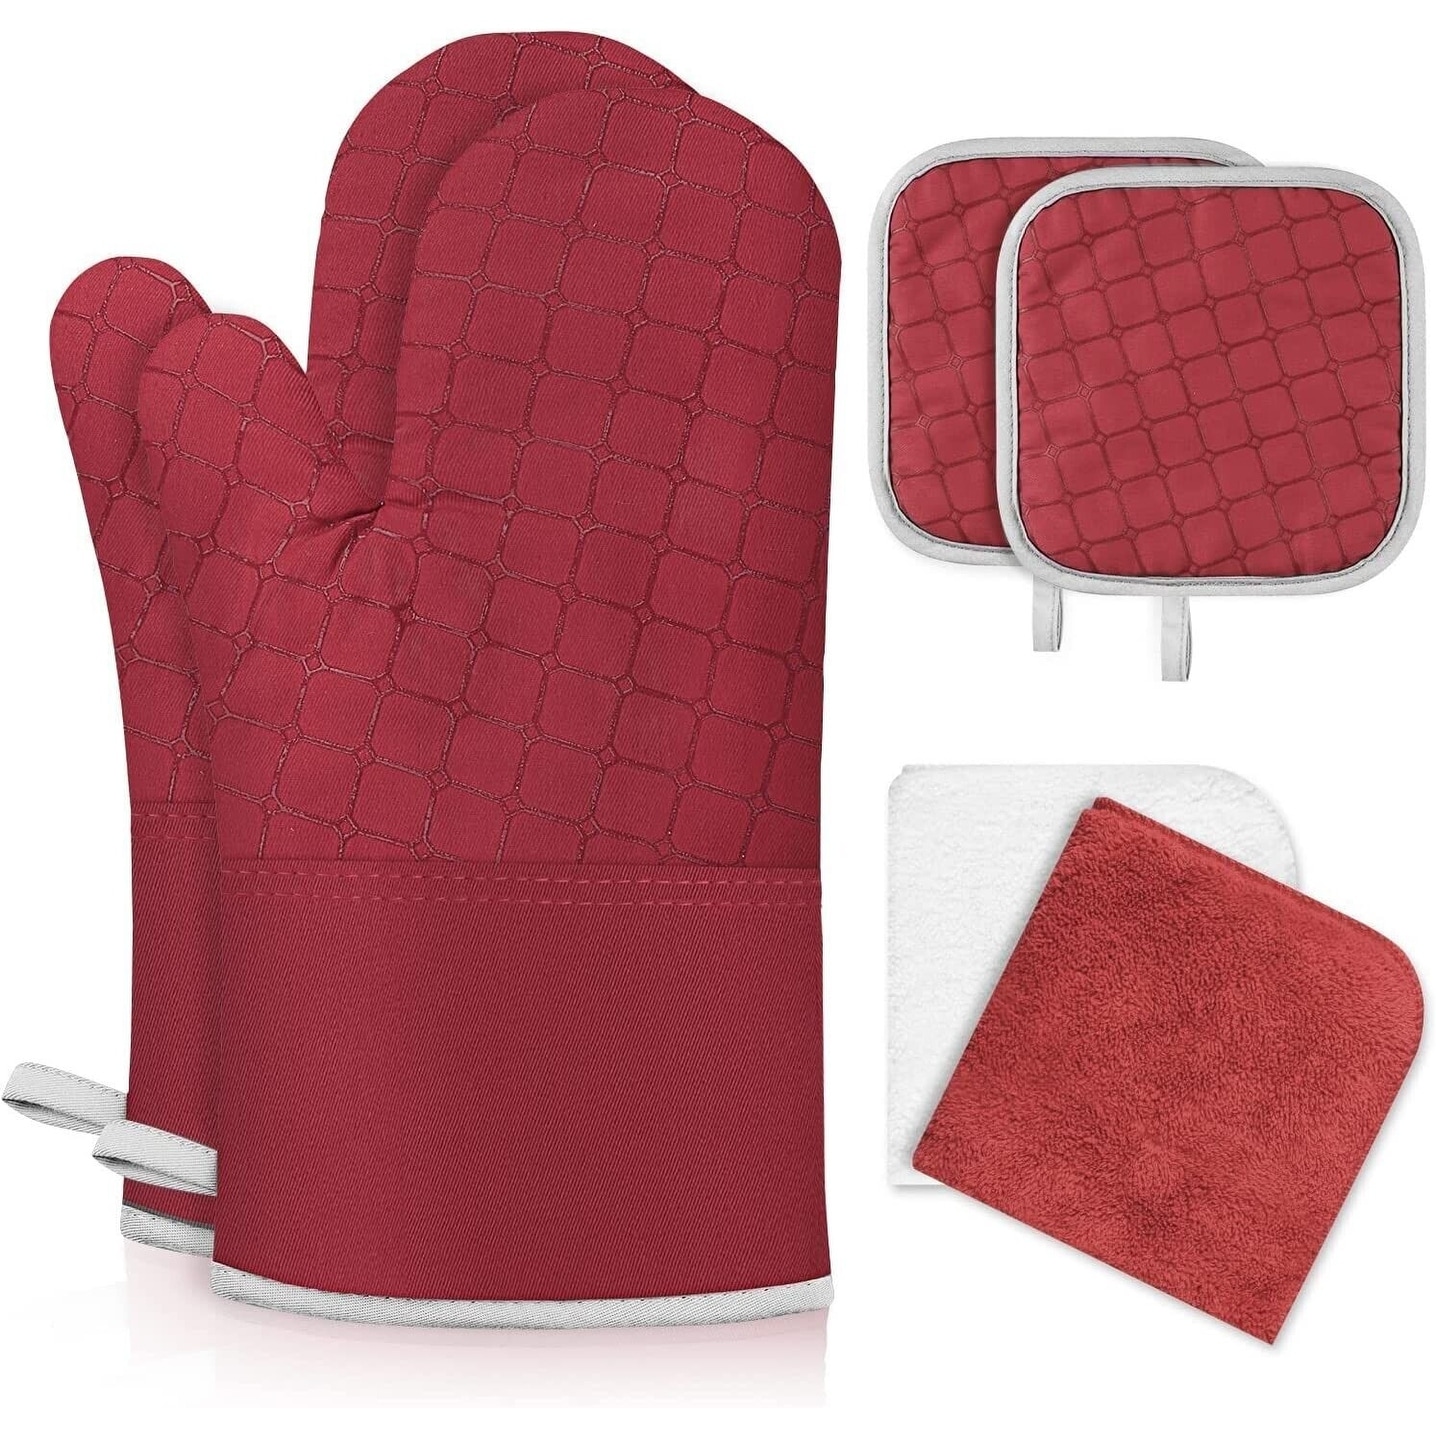 https://ak1.ostkcdn.com/images/products/is/images/direct/c3361d3443346bea268706a8846ad2d3ea148a64/Heavy-Duty-Red-Silicone-Oven-Mitts-and-Pot-Holders.jpg